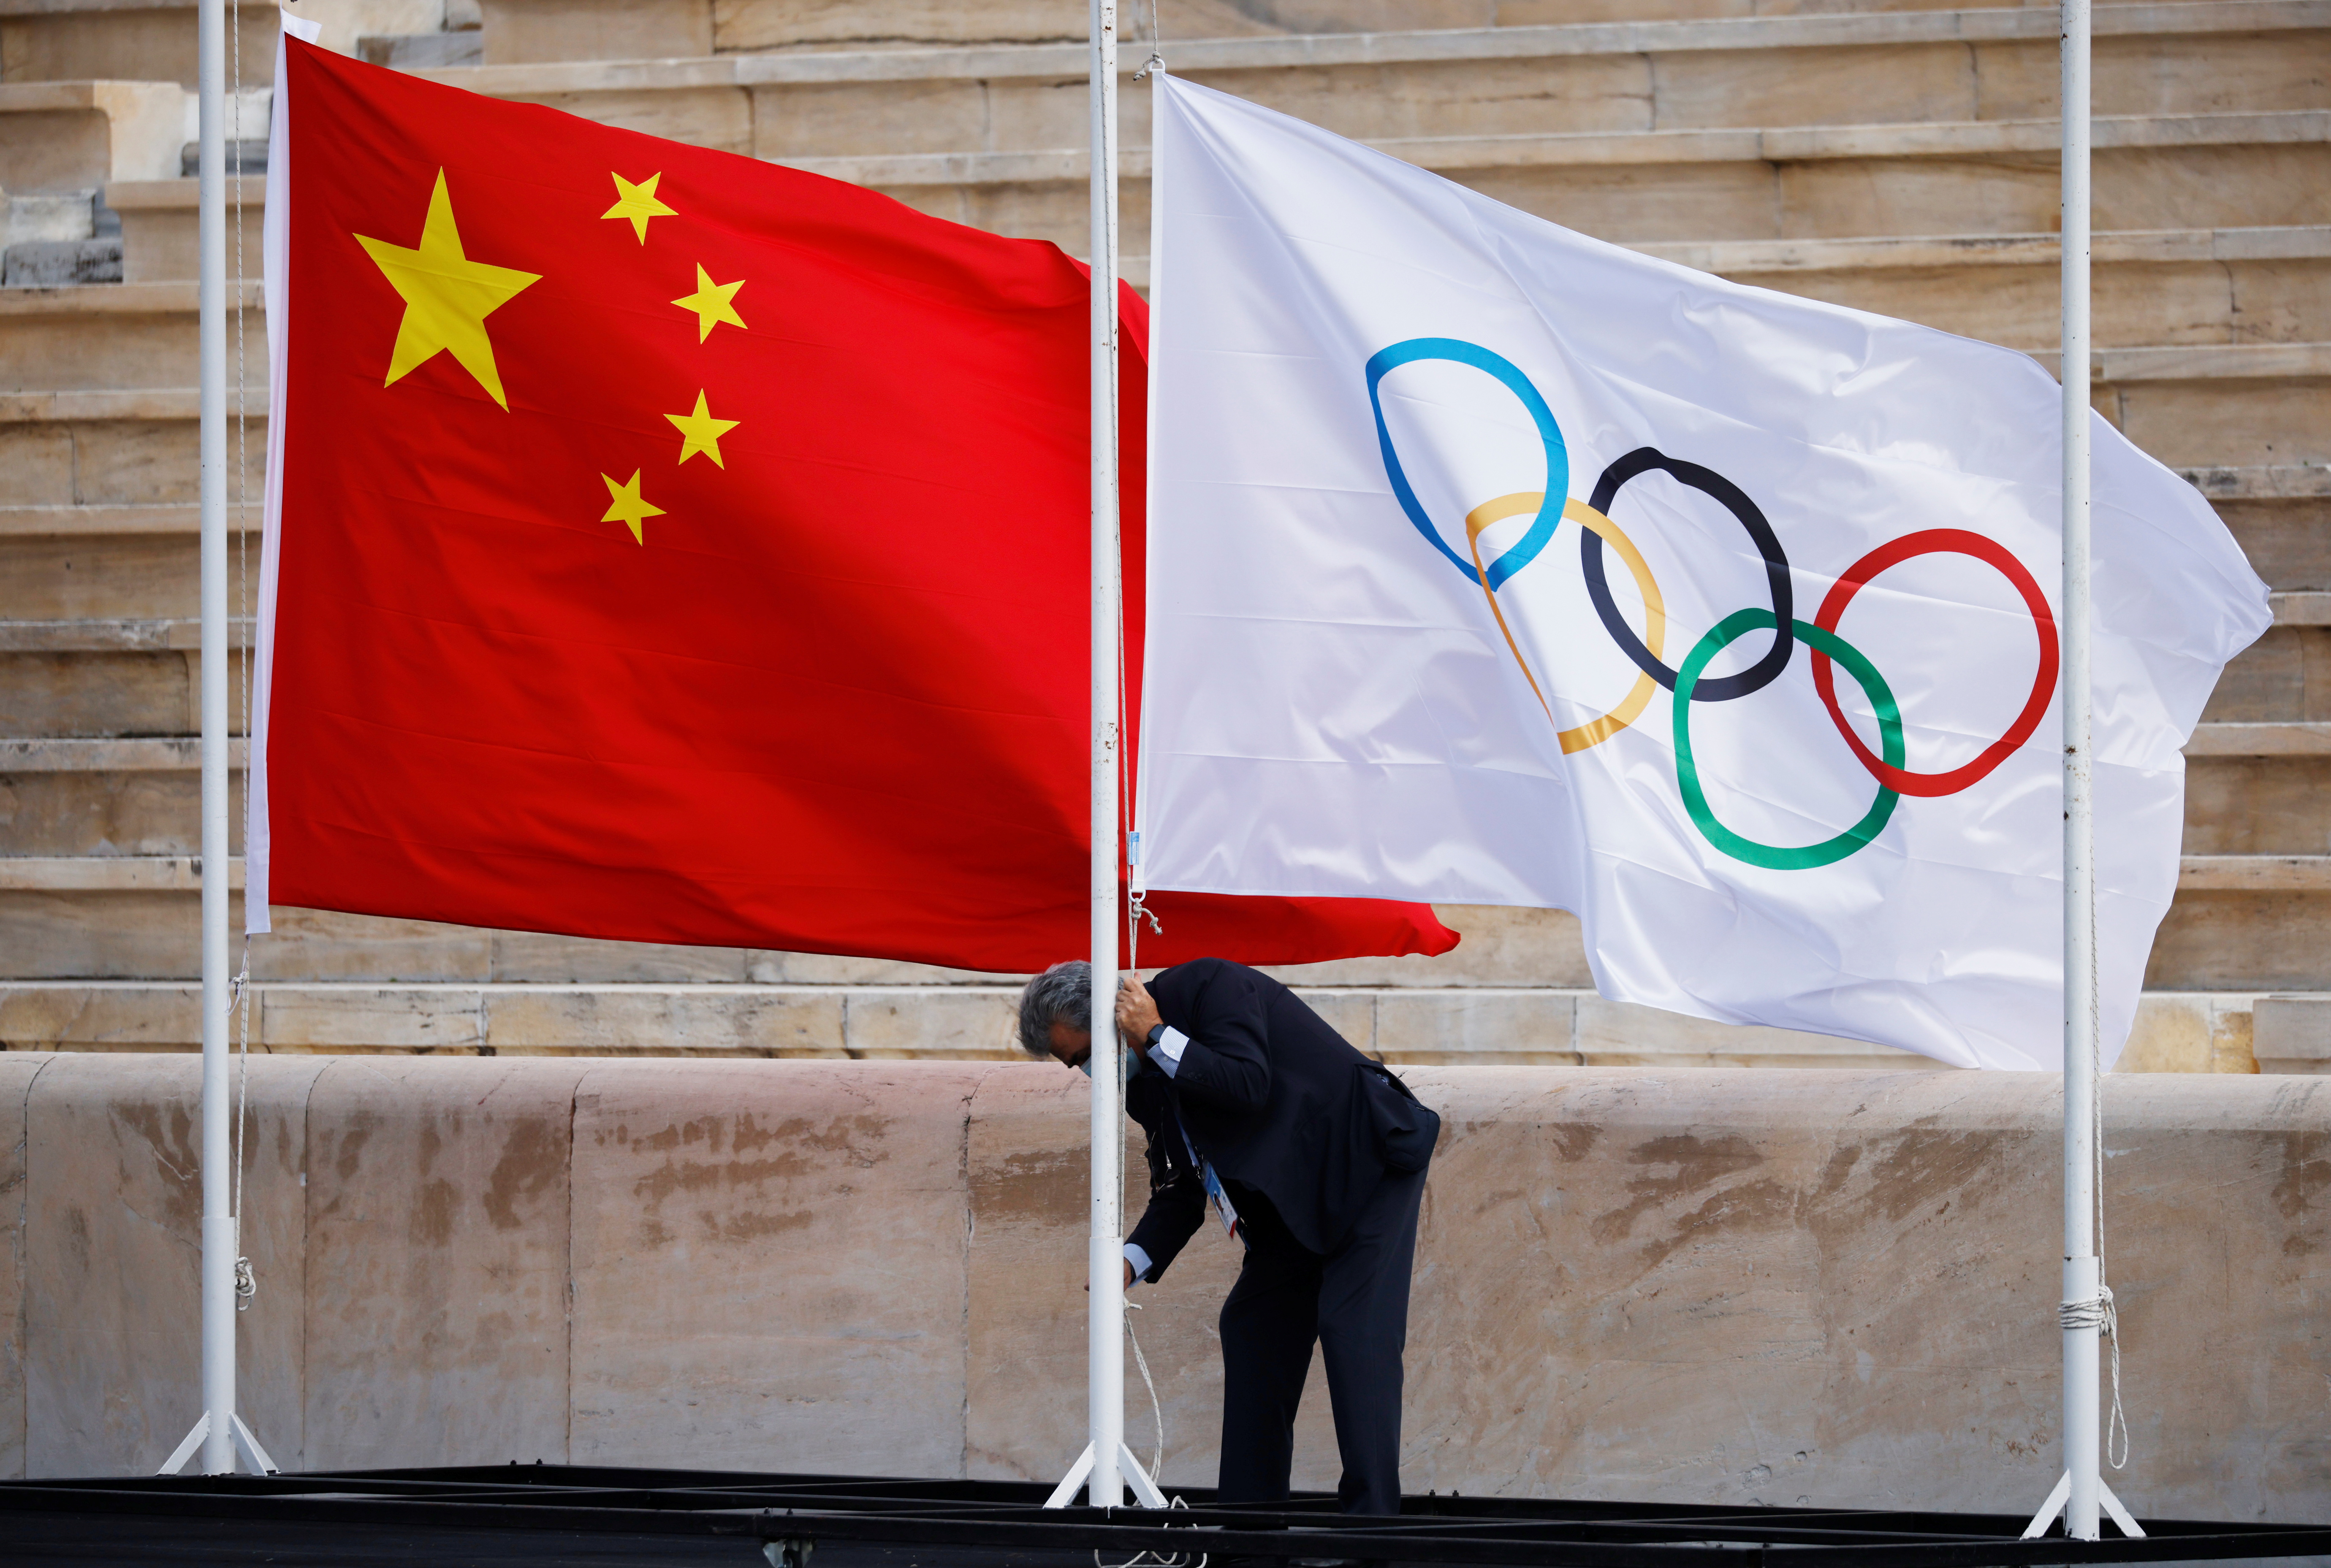 Winter Olympics - Flame handover ceremony in Athens for the Beijing 2022 Winter Olympics - Panathenaic Stadium, Athens, Greece - October 19, 2021 The flags of China and the Olympics are seen being raised before the ceremony REUTERS/Alkis Konstantinidis/File Photo